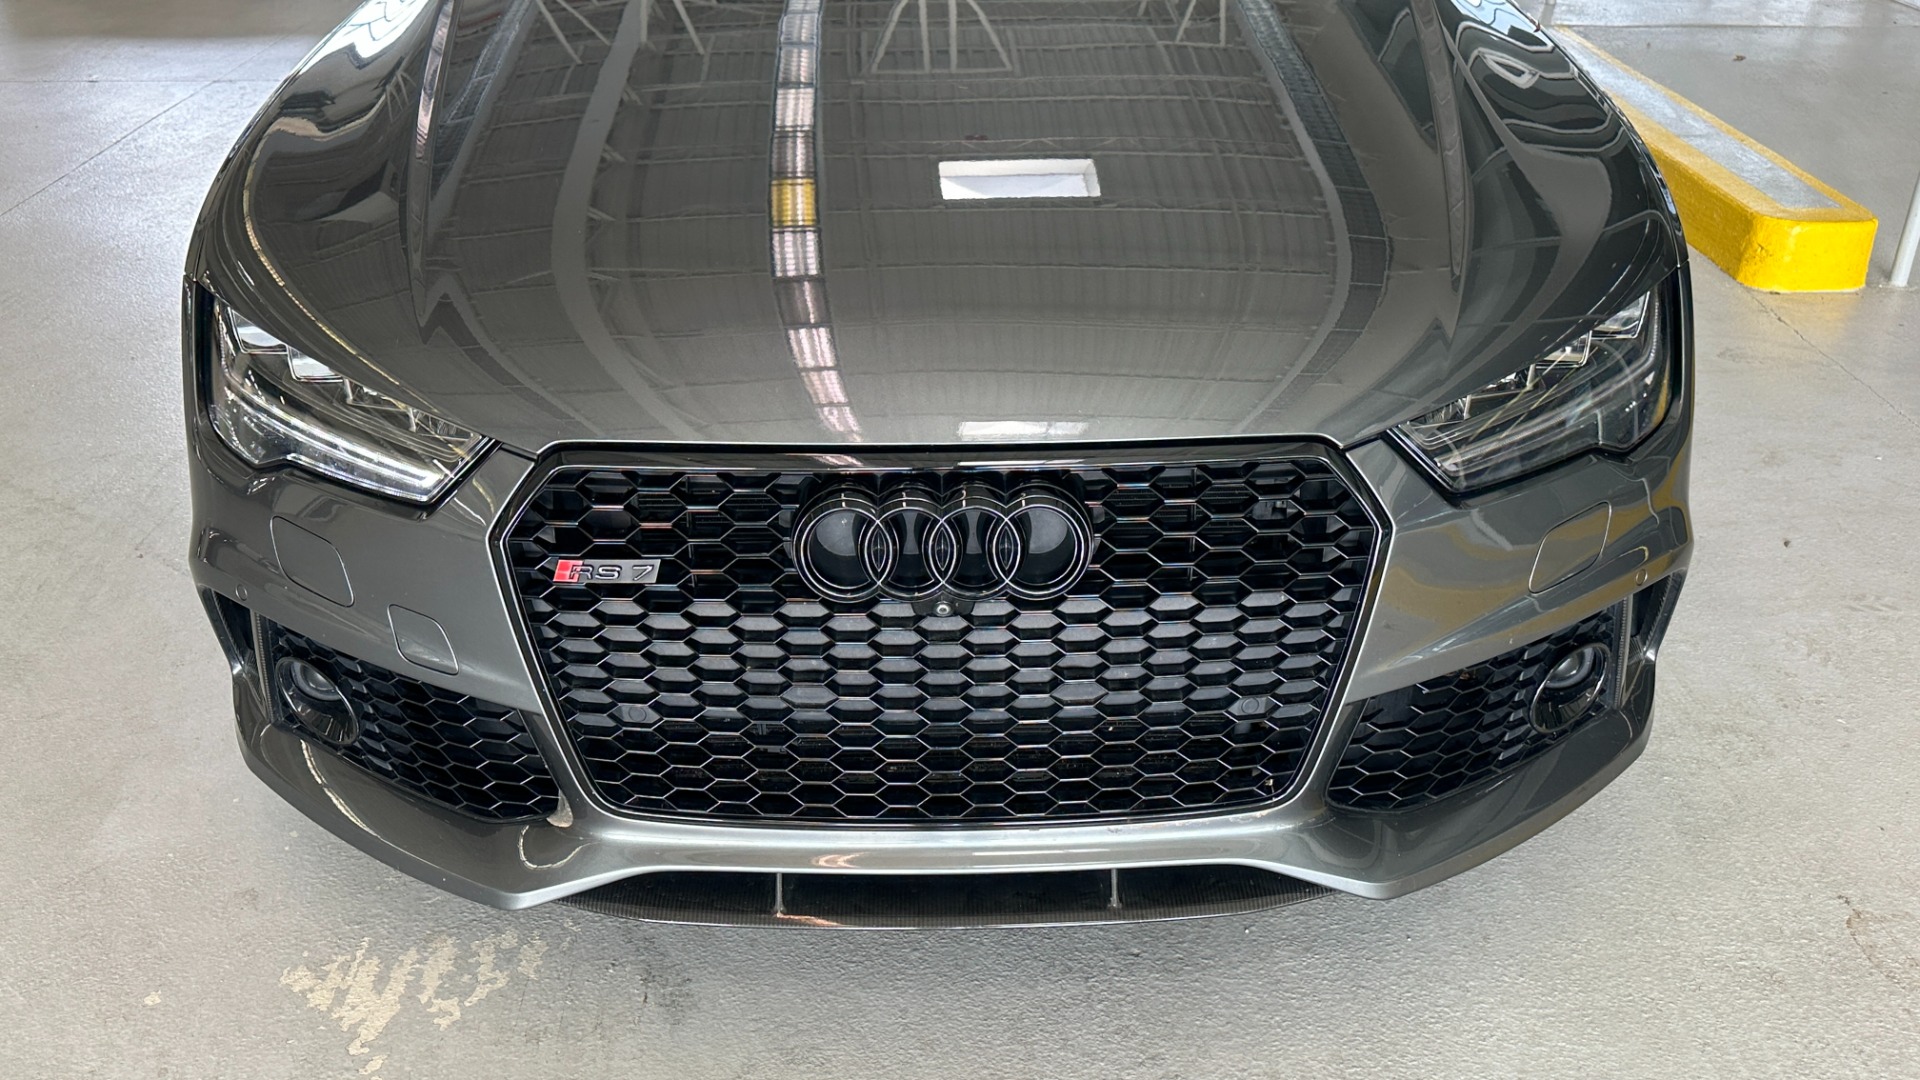 Used 2016 Audi RS 7 PERFORMANCE PRESTIGE / ADV1 WHEELS / EXHAUST / CARBON FIBER for sale $79,995 at Formula Imports in Charlotte NC 28227 9